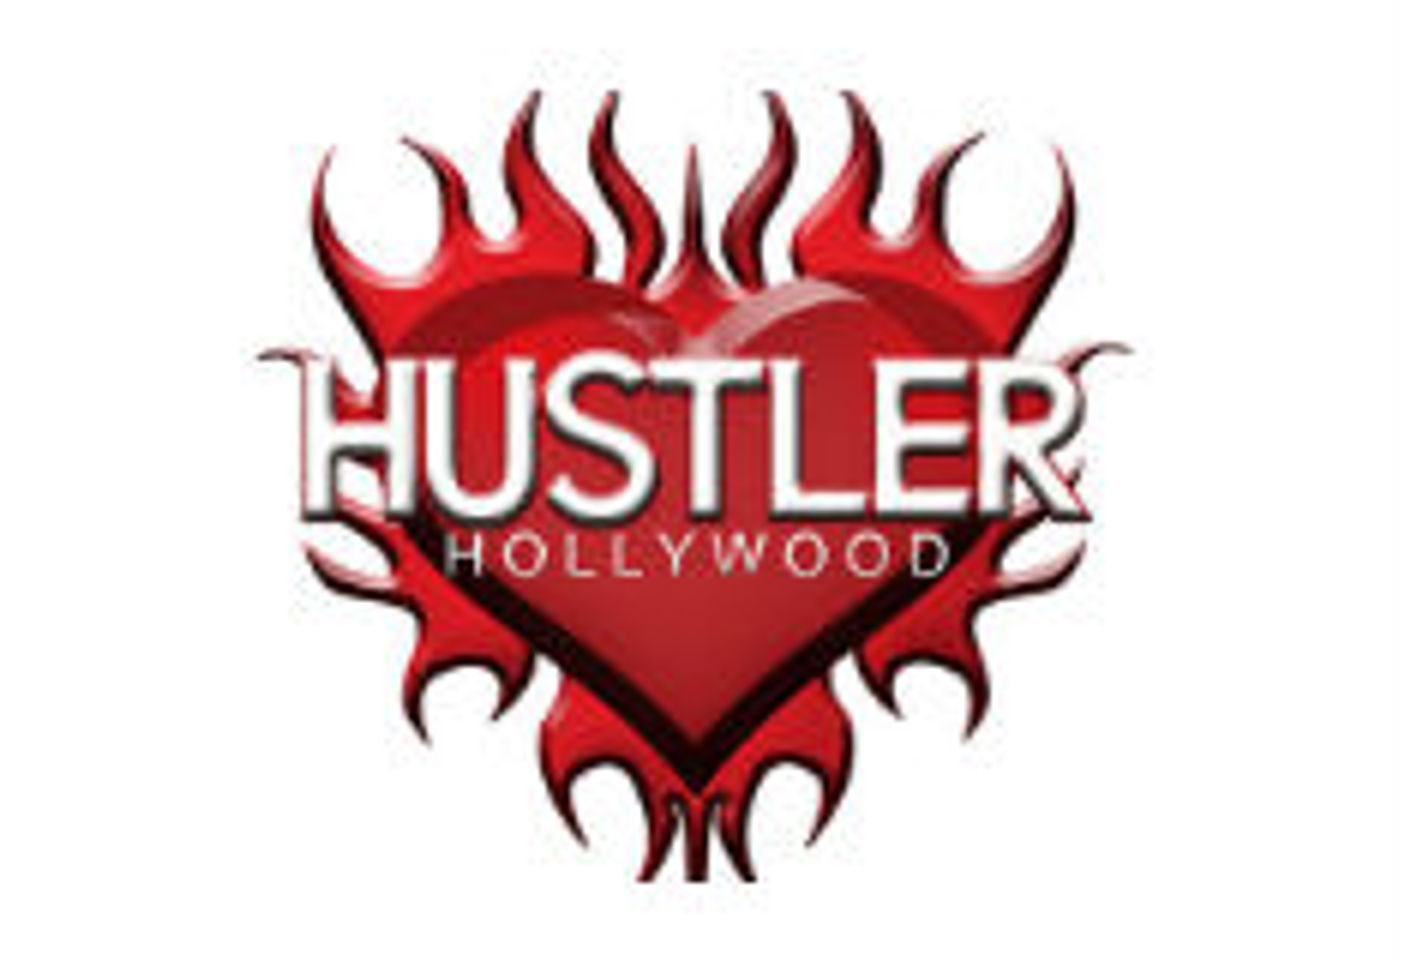 Hustler Hollywood Offers Month of Deals With 'Handle the Holidays' Promo